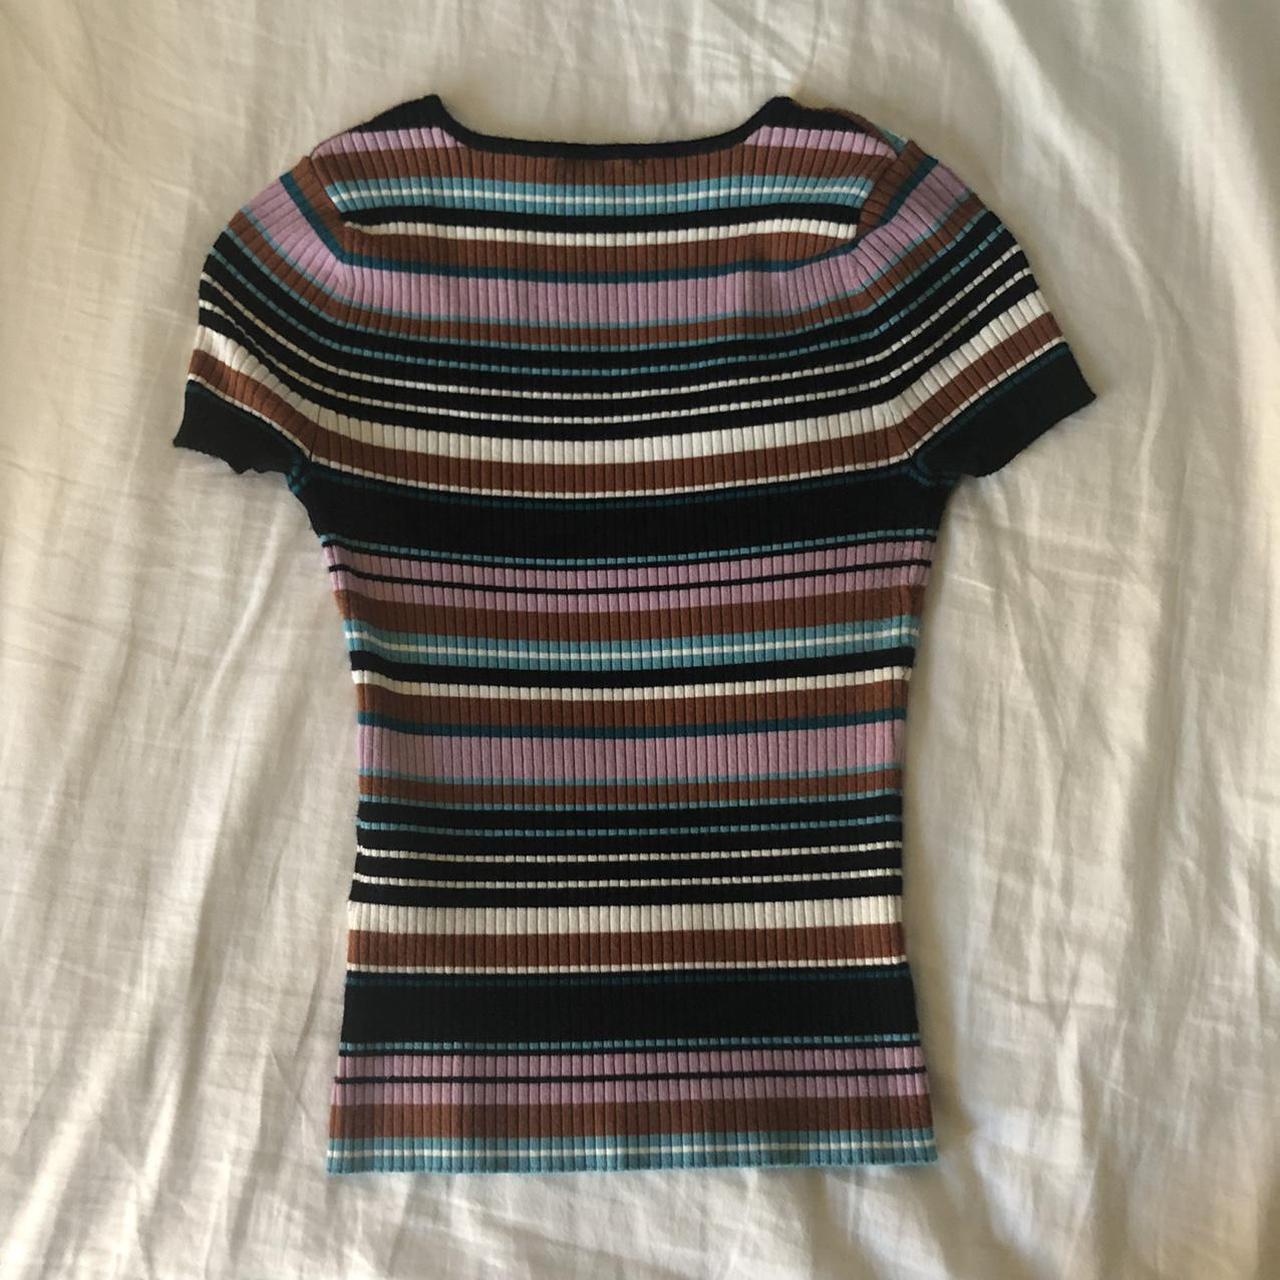 Product Image 2 - striped ribbed knit tshirt
~the pictures